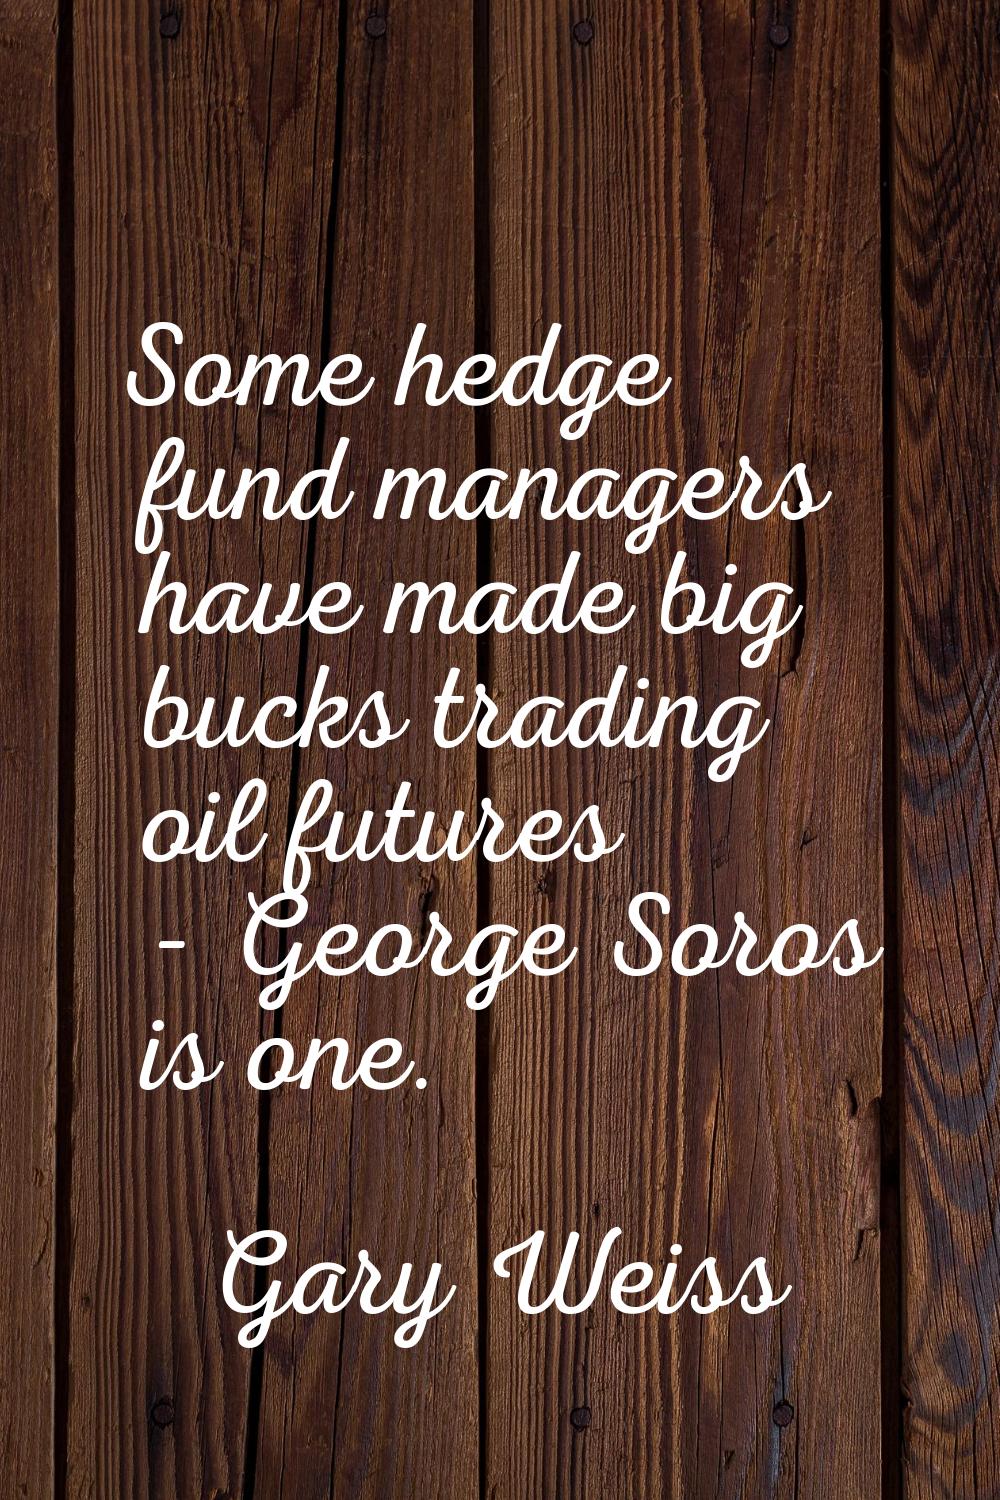 Some hedge fund managers have made big bucks trading oil futures - George Soros is one.